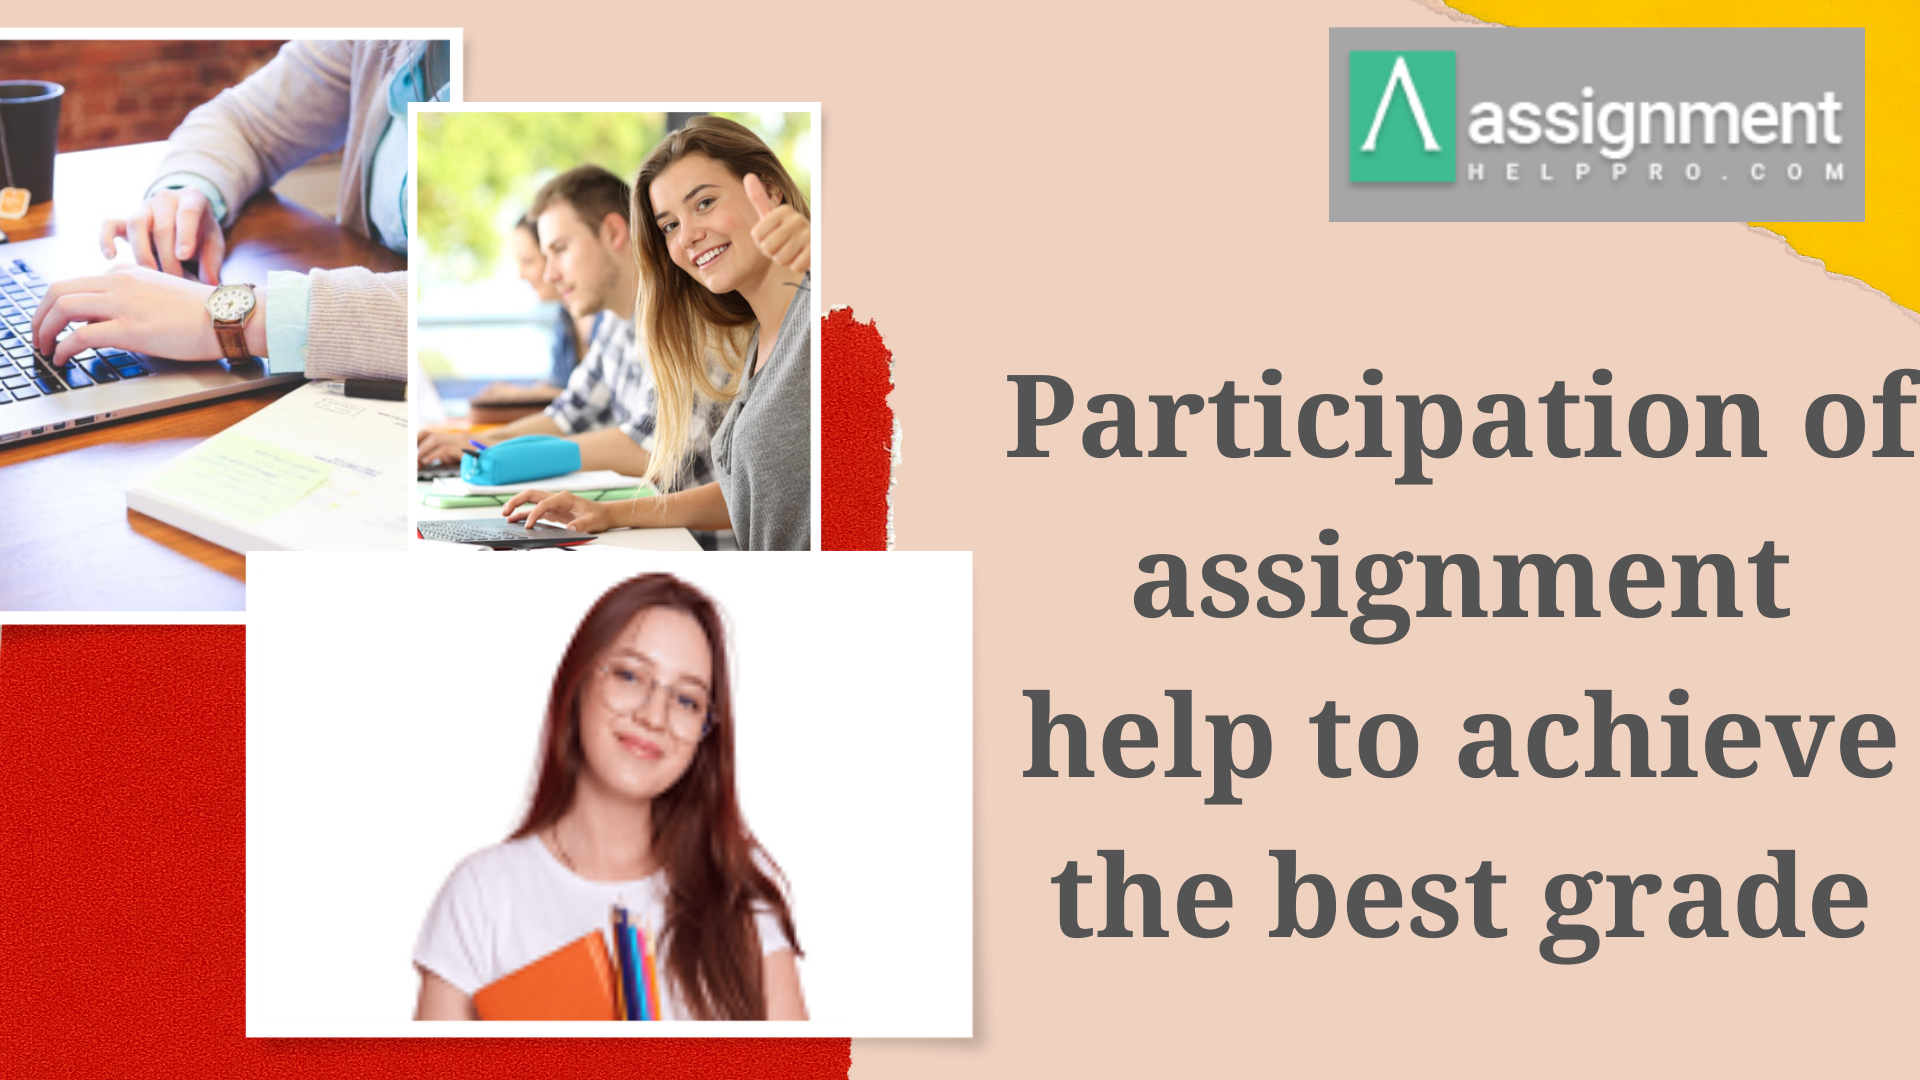 Participation of assignment help to achieve the best grade – Assignment help Australia